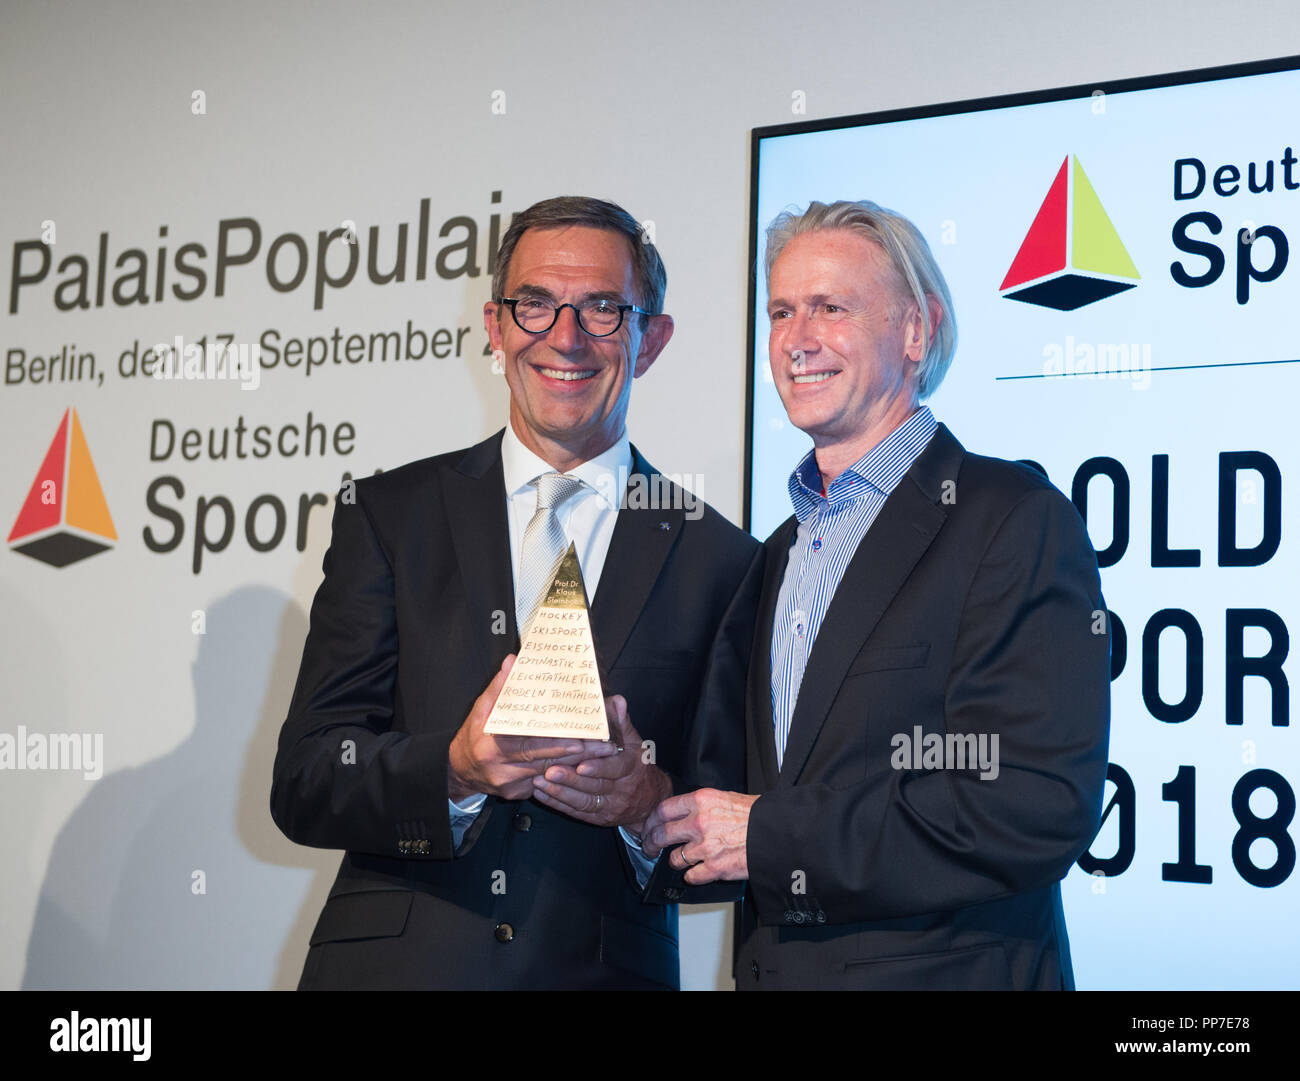 from left to right: Prof. Dr. med. Klaus STEINBACH (swimming, prize winner 2018) and dr. Roland MATTHES (swimming, prize winner 2004) Award of the Golden Sports Pyramid and awarding of the Sports Fellowship 2018 in the PalaisPopulaire of Deutsche Bank in Berlin, Germany on 17.09.2018. | Usage worldwide Stock Photo